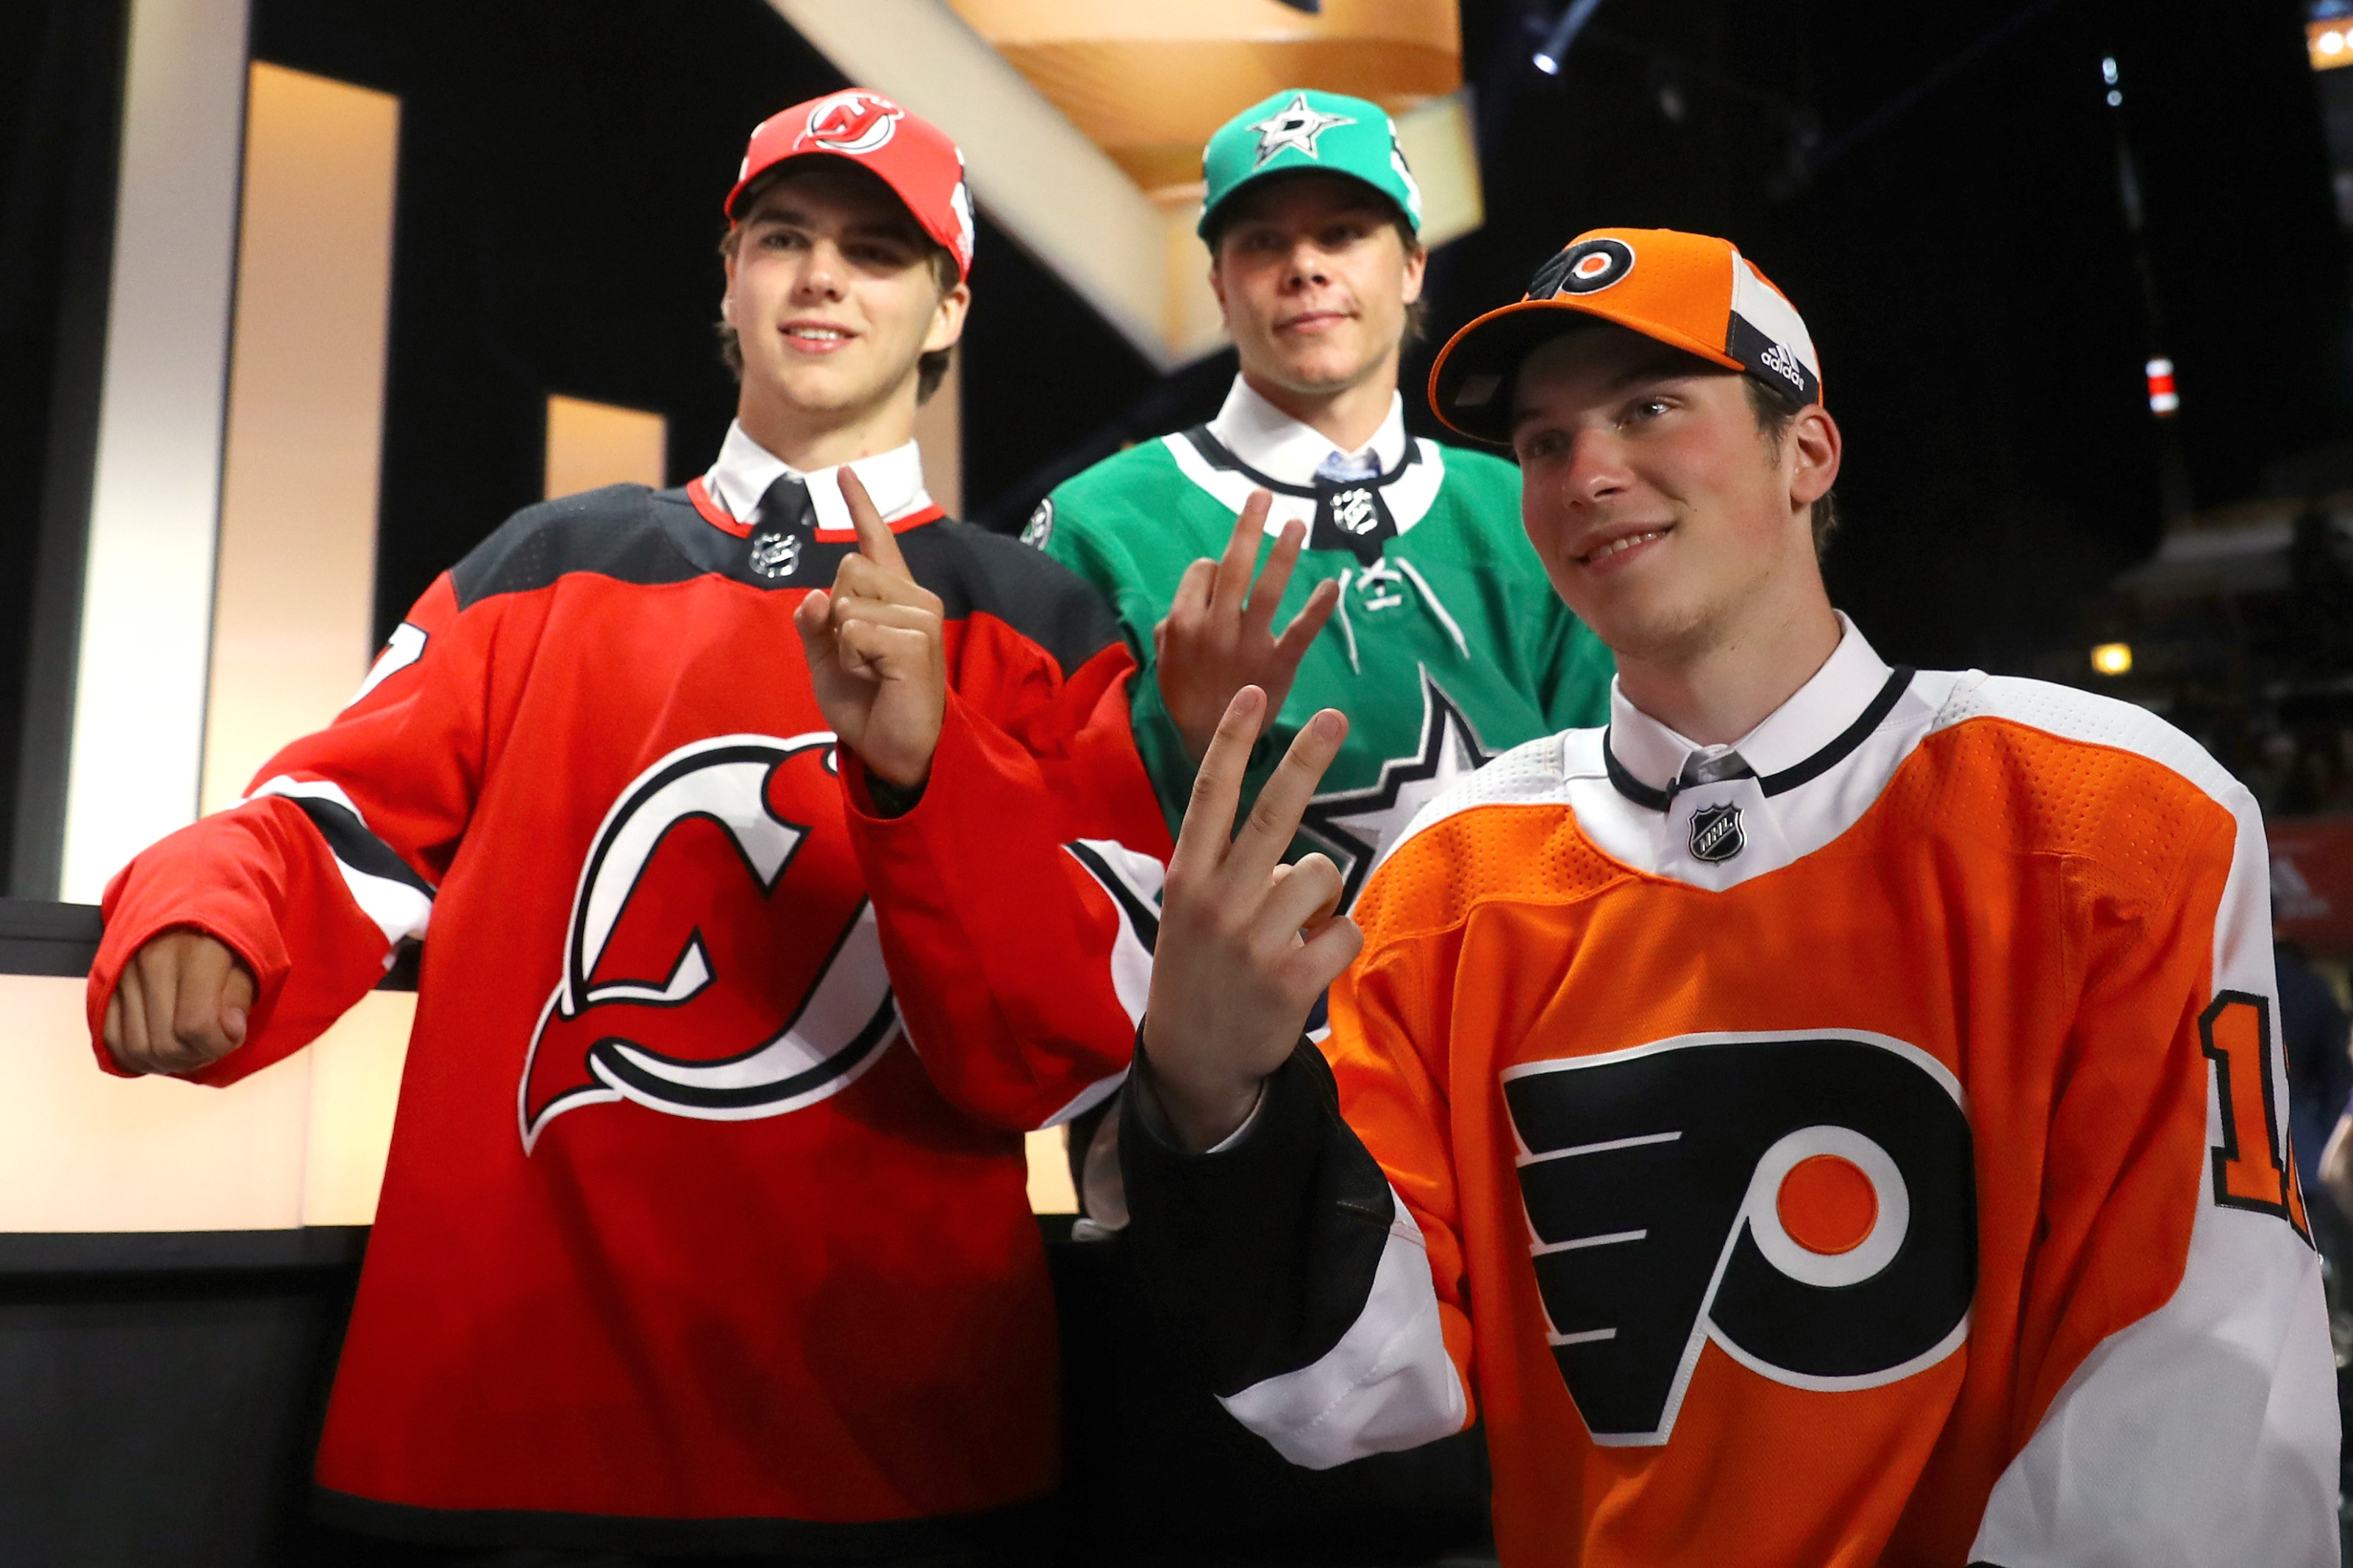 Revisiting the top 5 picks of the 2017 NHL Draft